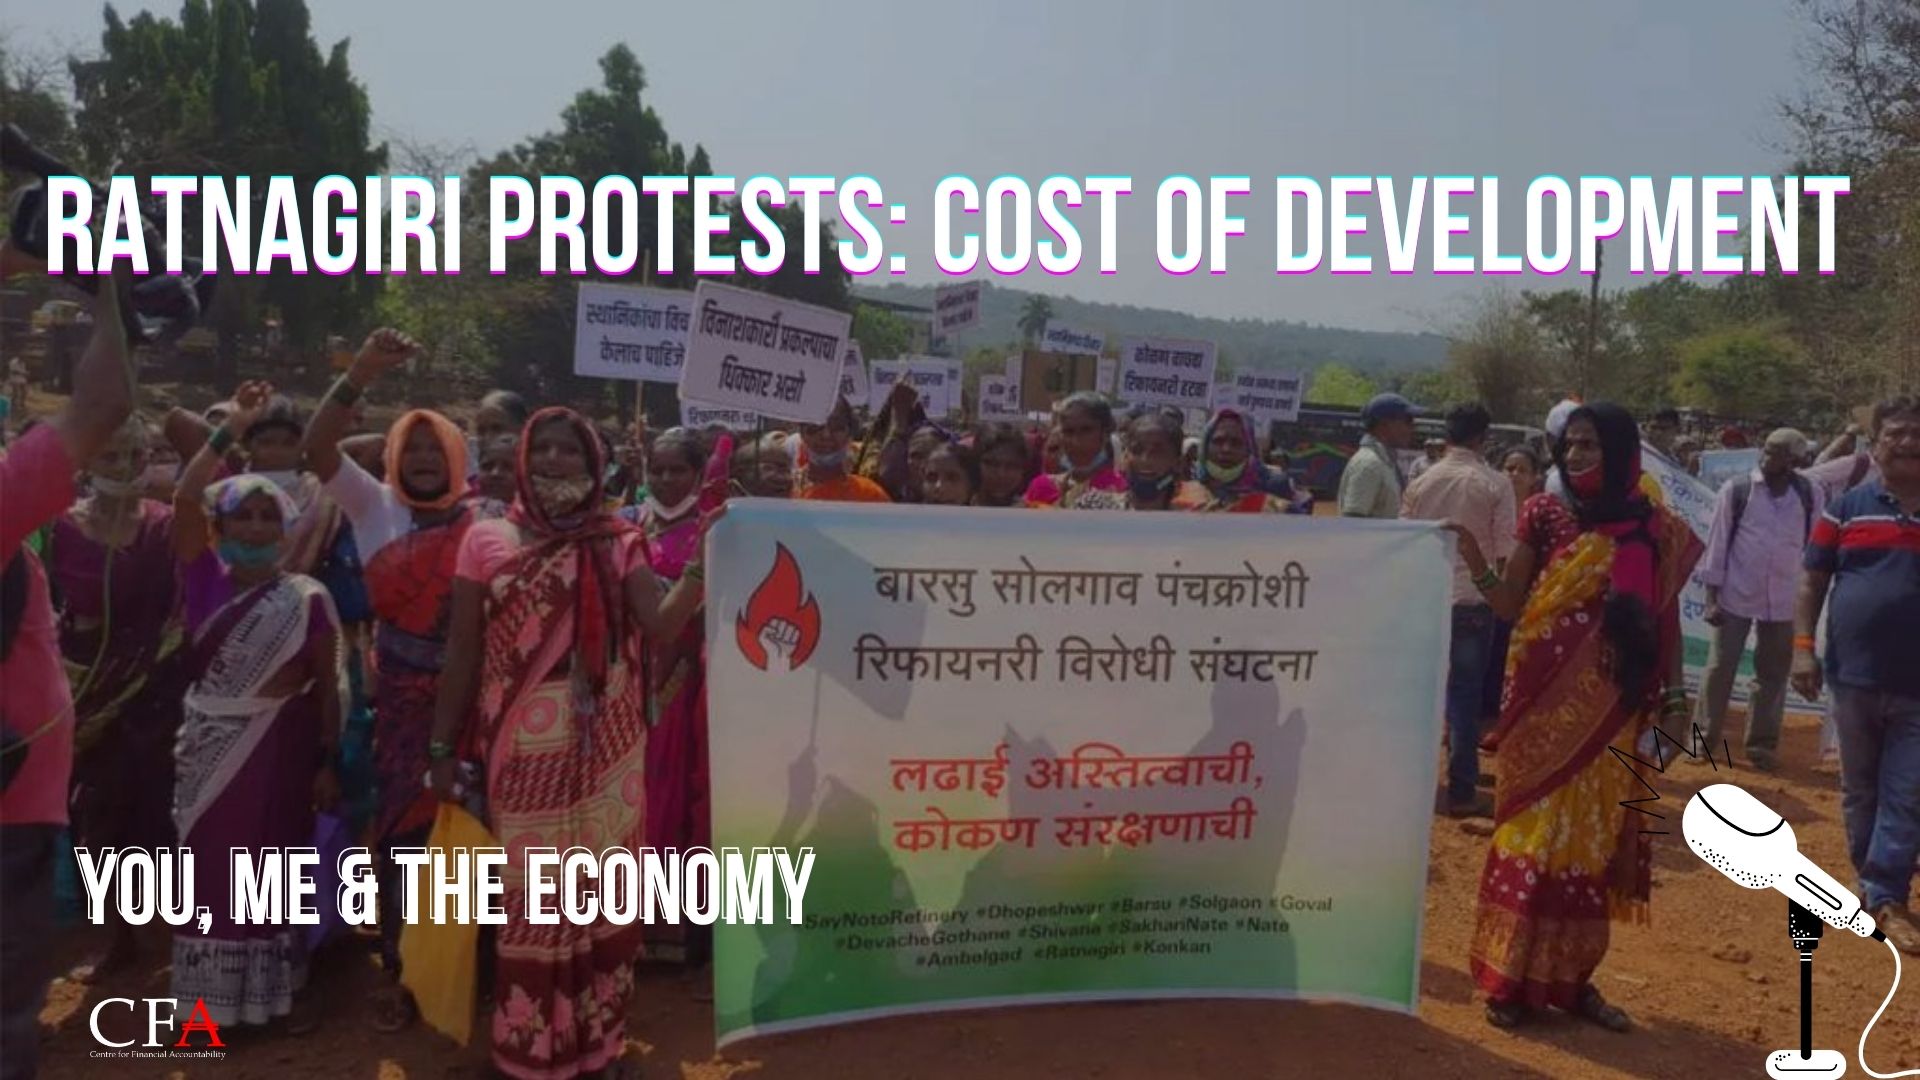 <strong>Ratnagiri protests: Cost of development</strong>